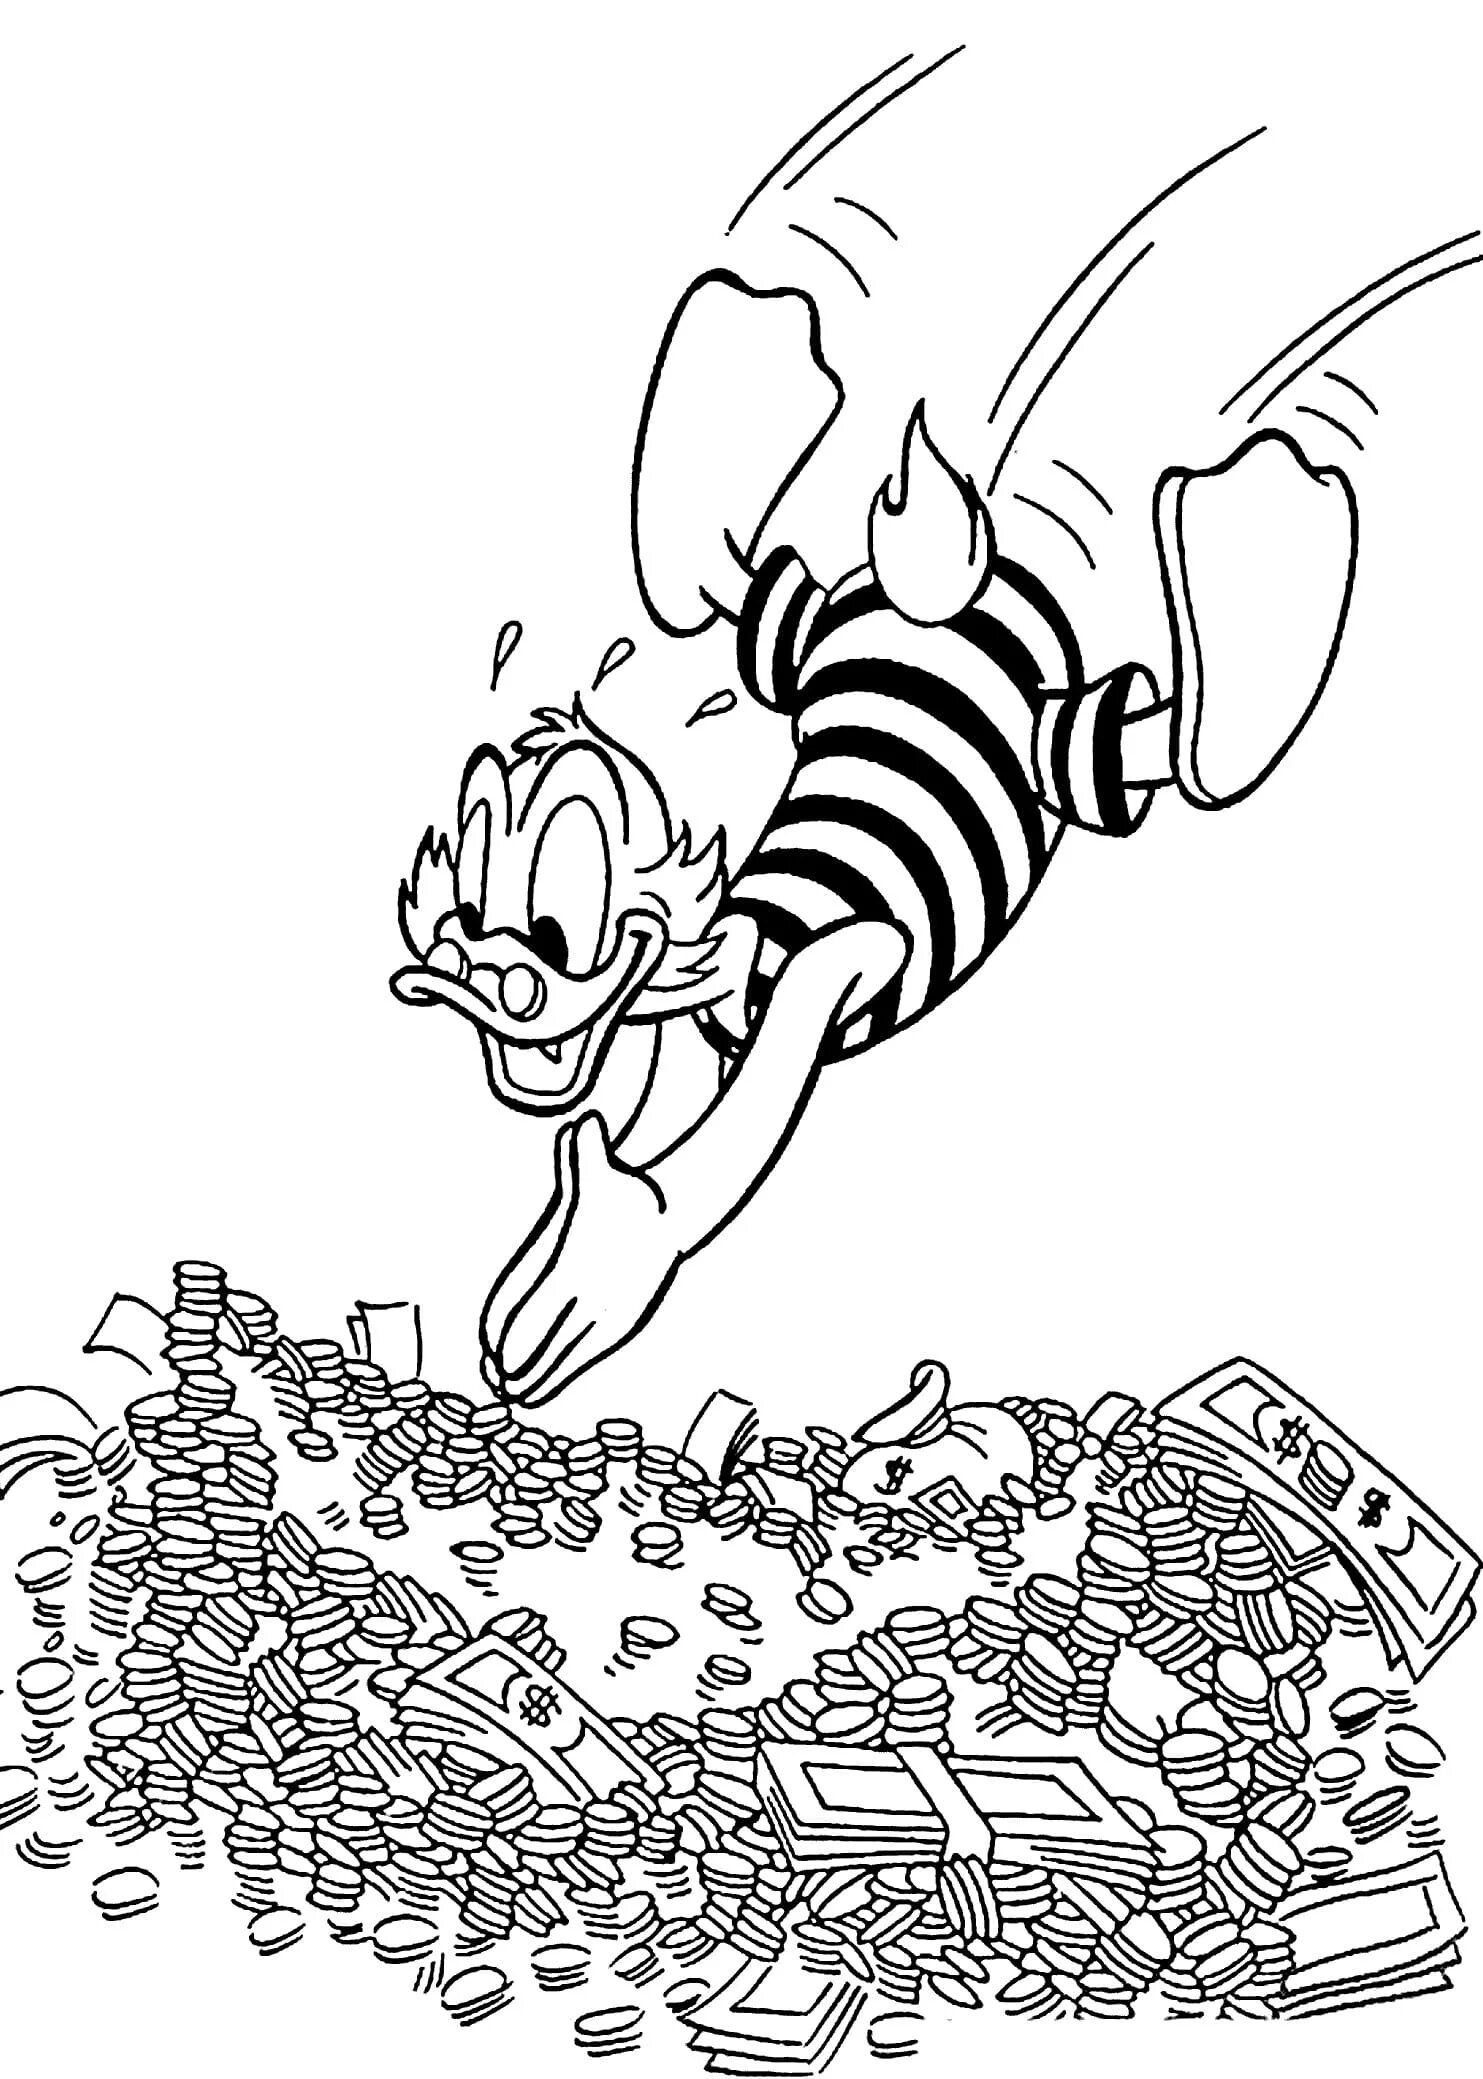 Scrooge mcduck with money #5